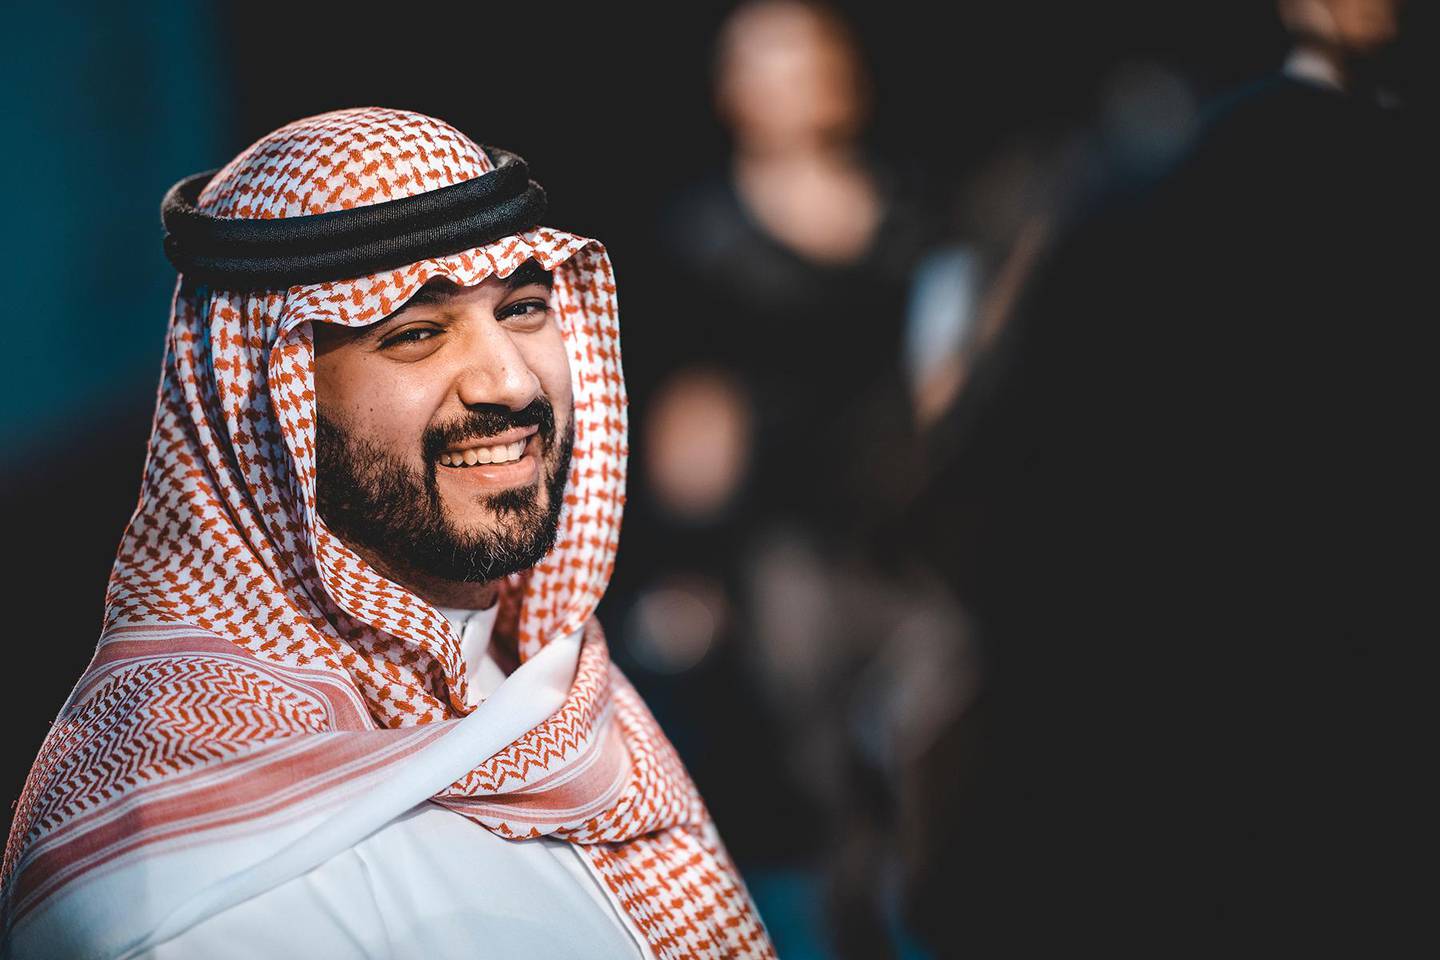 'Gamers Without Borders has shown the role eSports and gaming can play in being a global force good,' said Prince Faisal bin Bandar bin Sultan, president of Safeis. Courtesy Gamers Without Borders